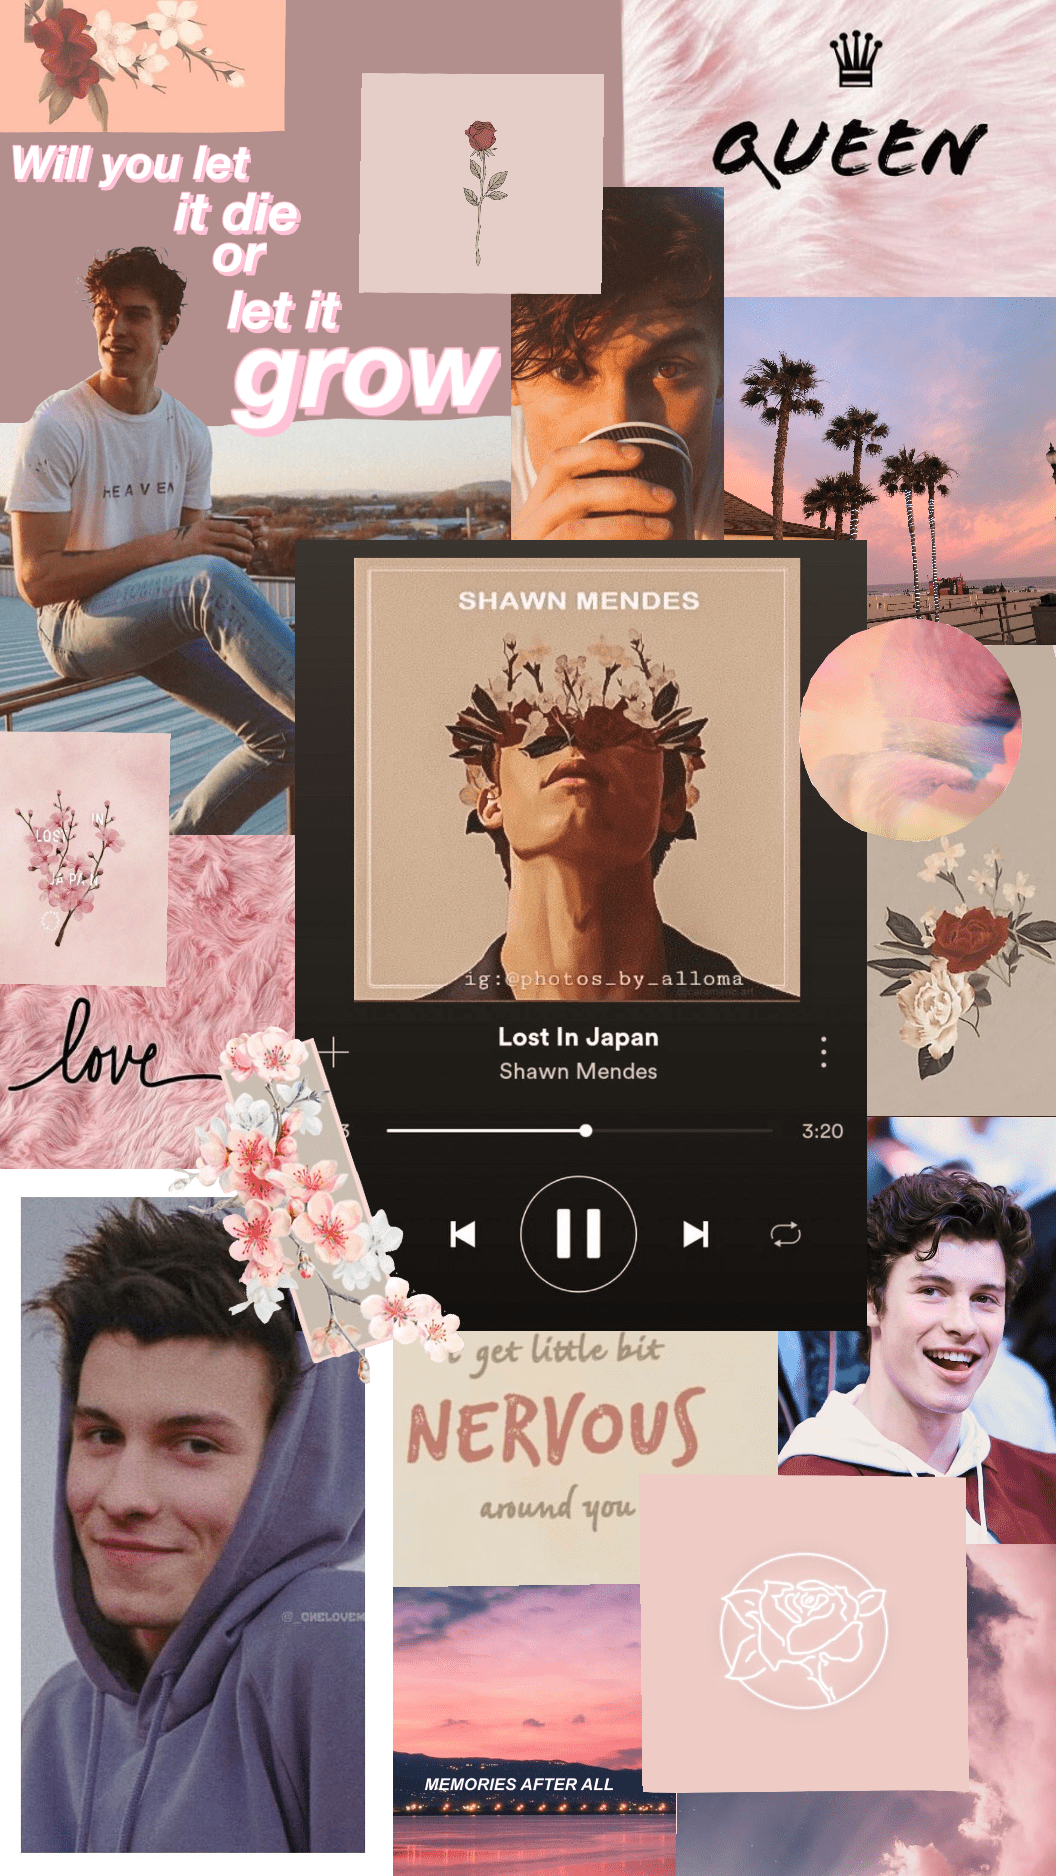 Shawn Mendes Wallpaper. Shawn mendes wallpaper, Shawn mendes songs, Shawn